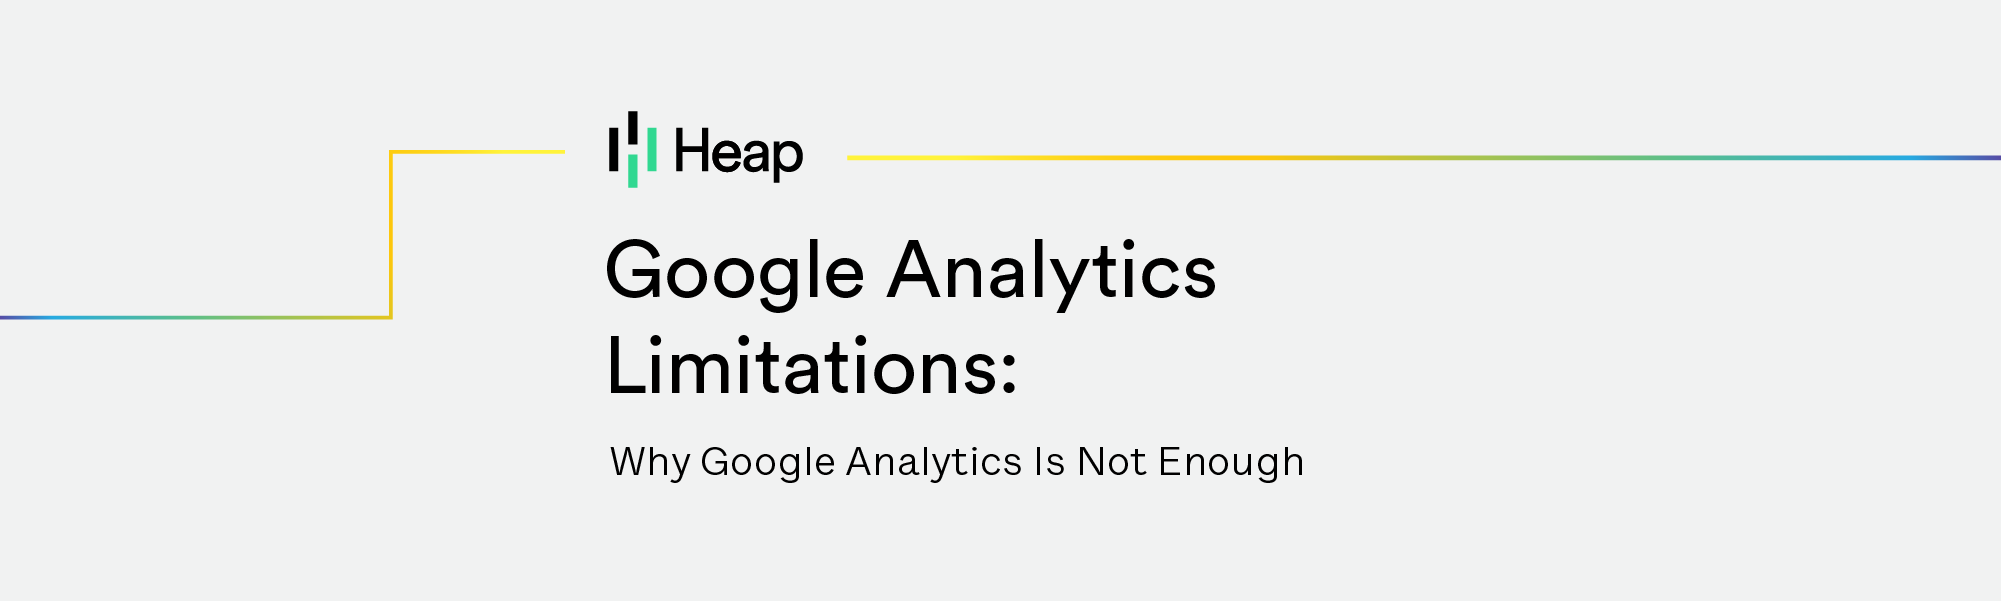 Google Analytics Limitations: Why Google Analytics Is Not Enough